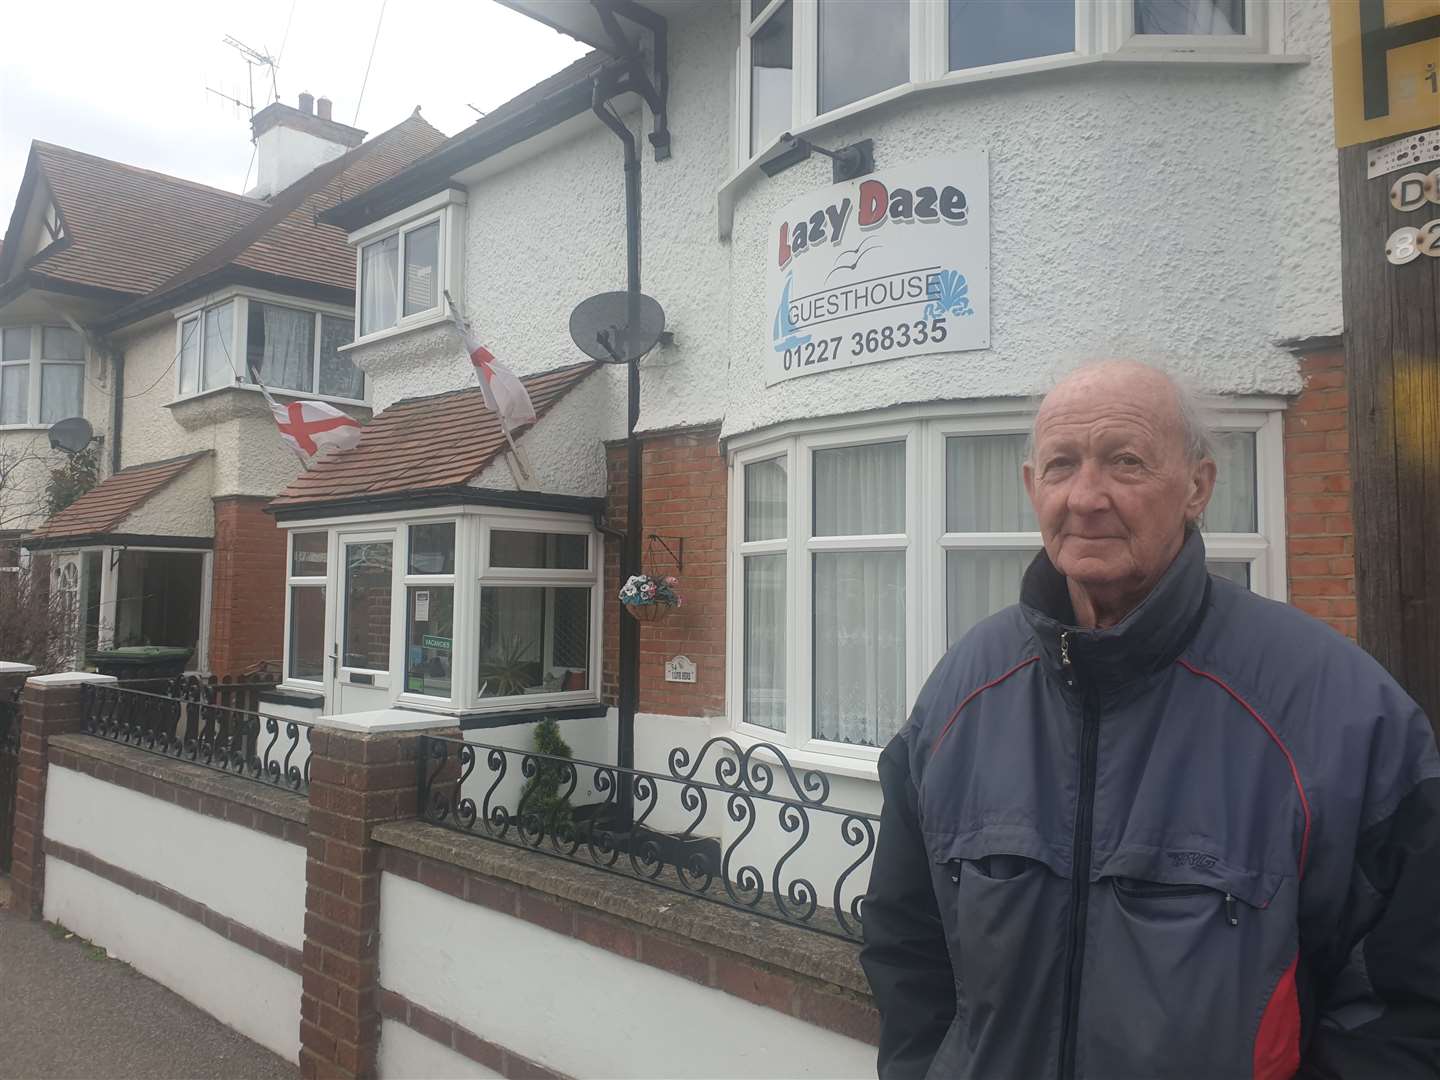 Andy Griffin of Lazy Daze guest house in Herne Bay